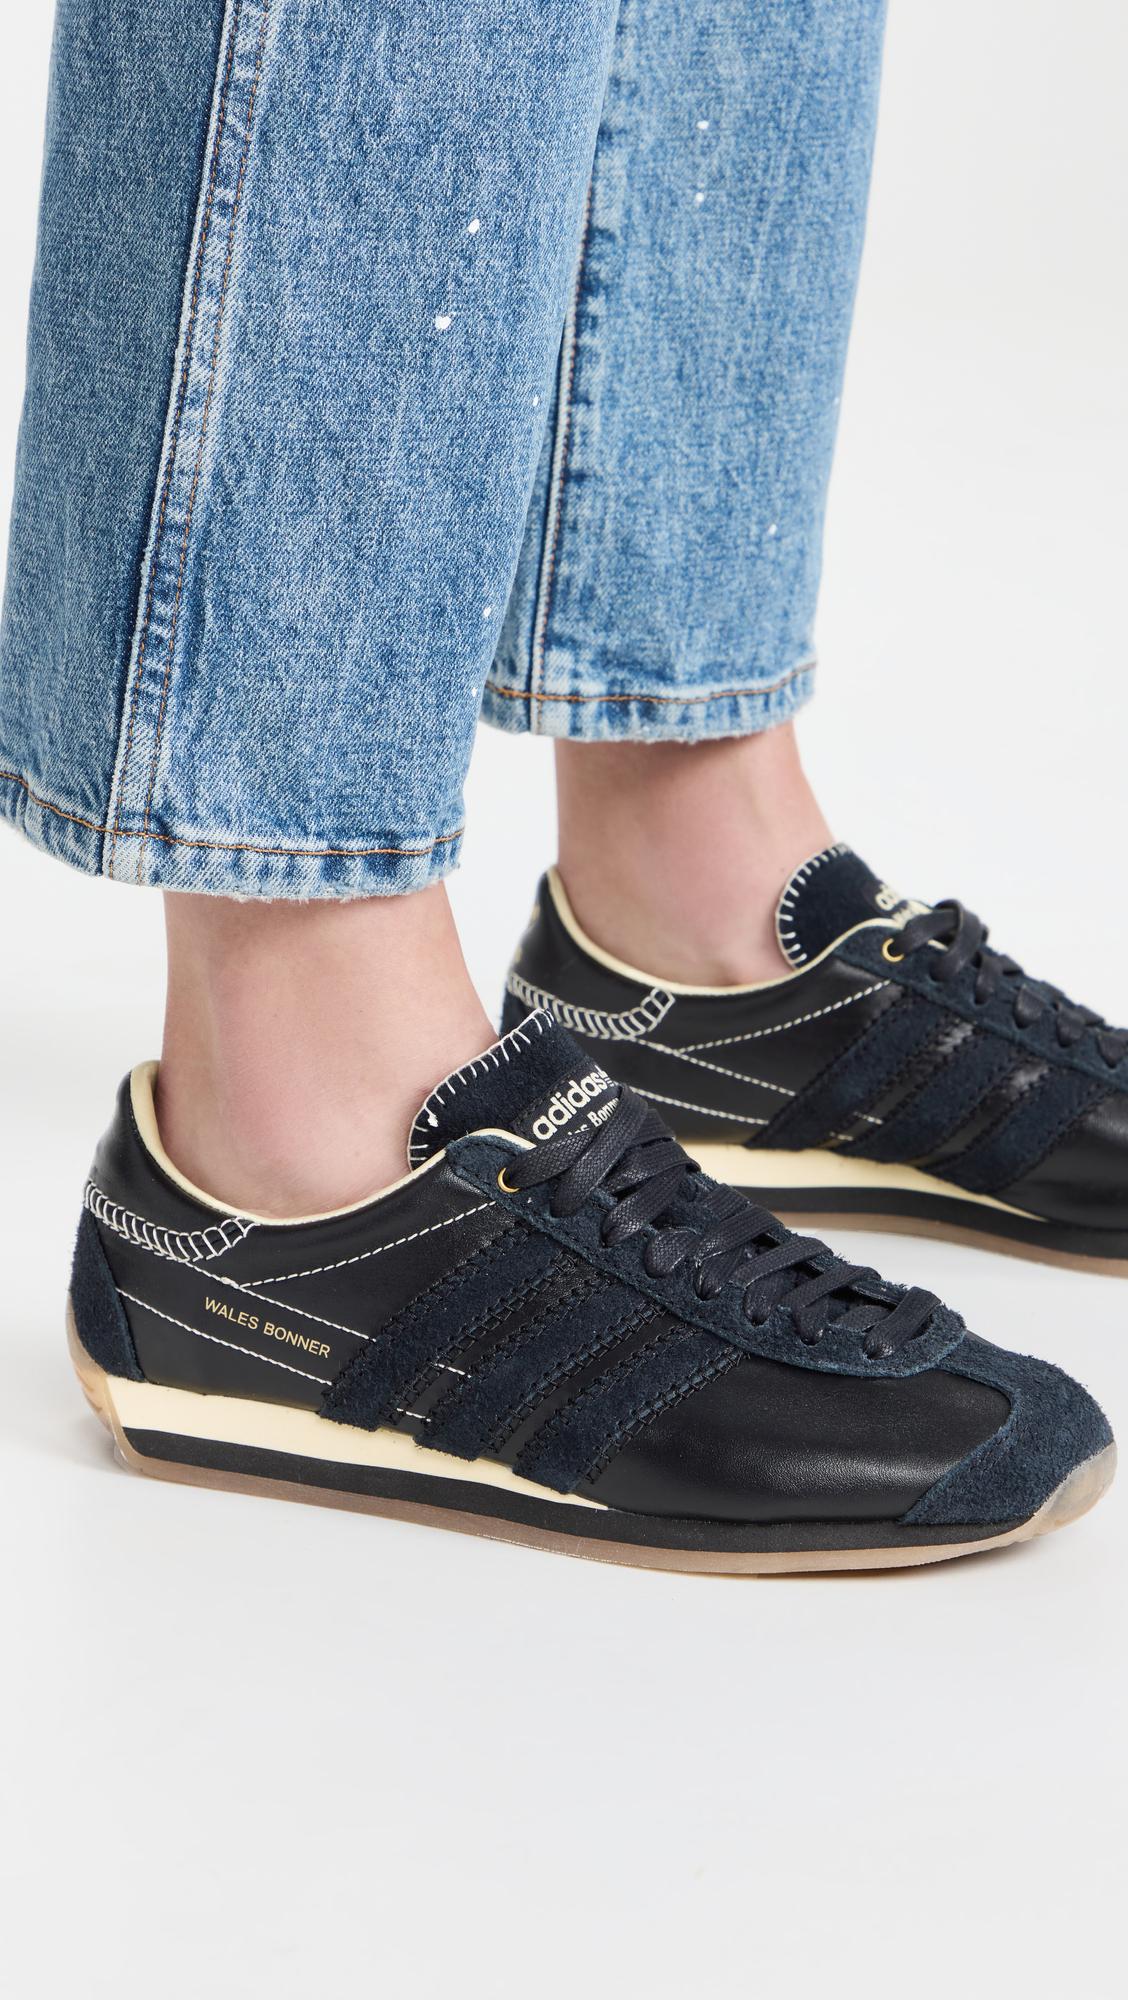 adidas X Wales Bonner Country Sneakers in Black | Lyst Canada